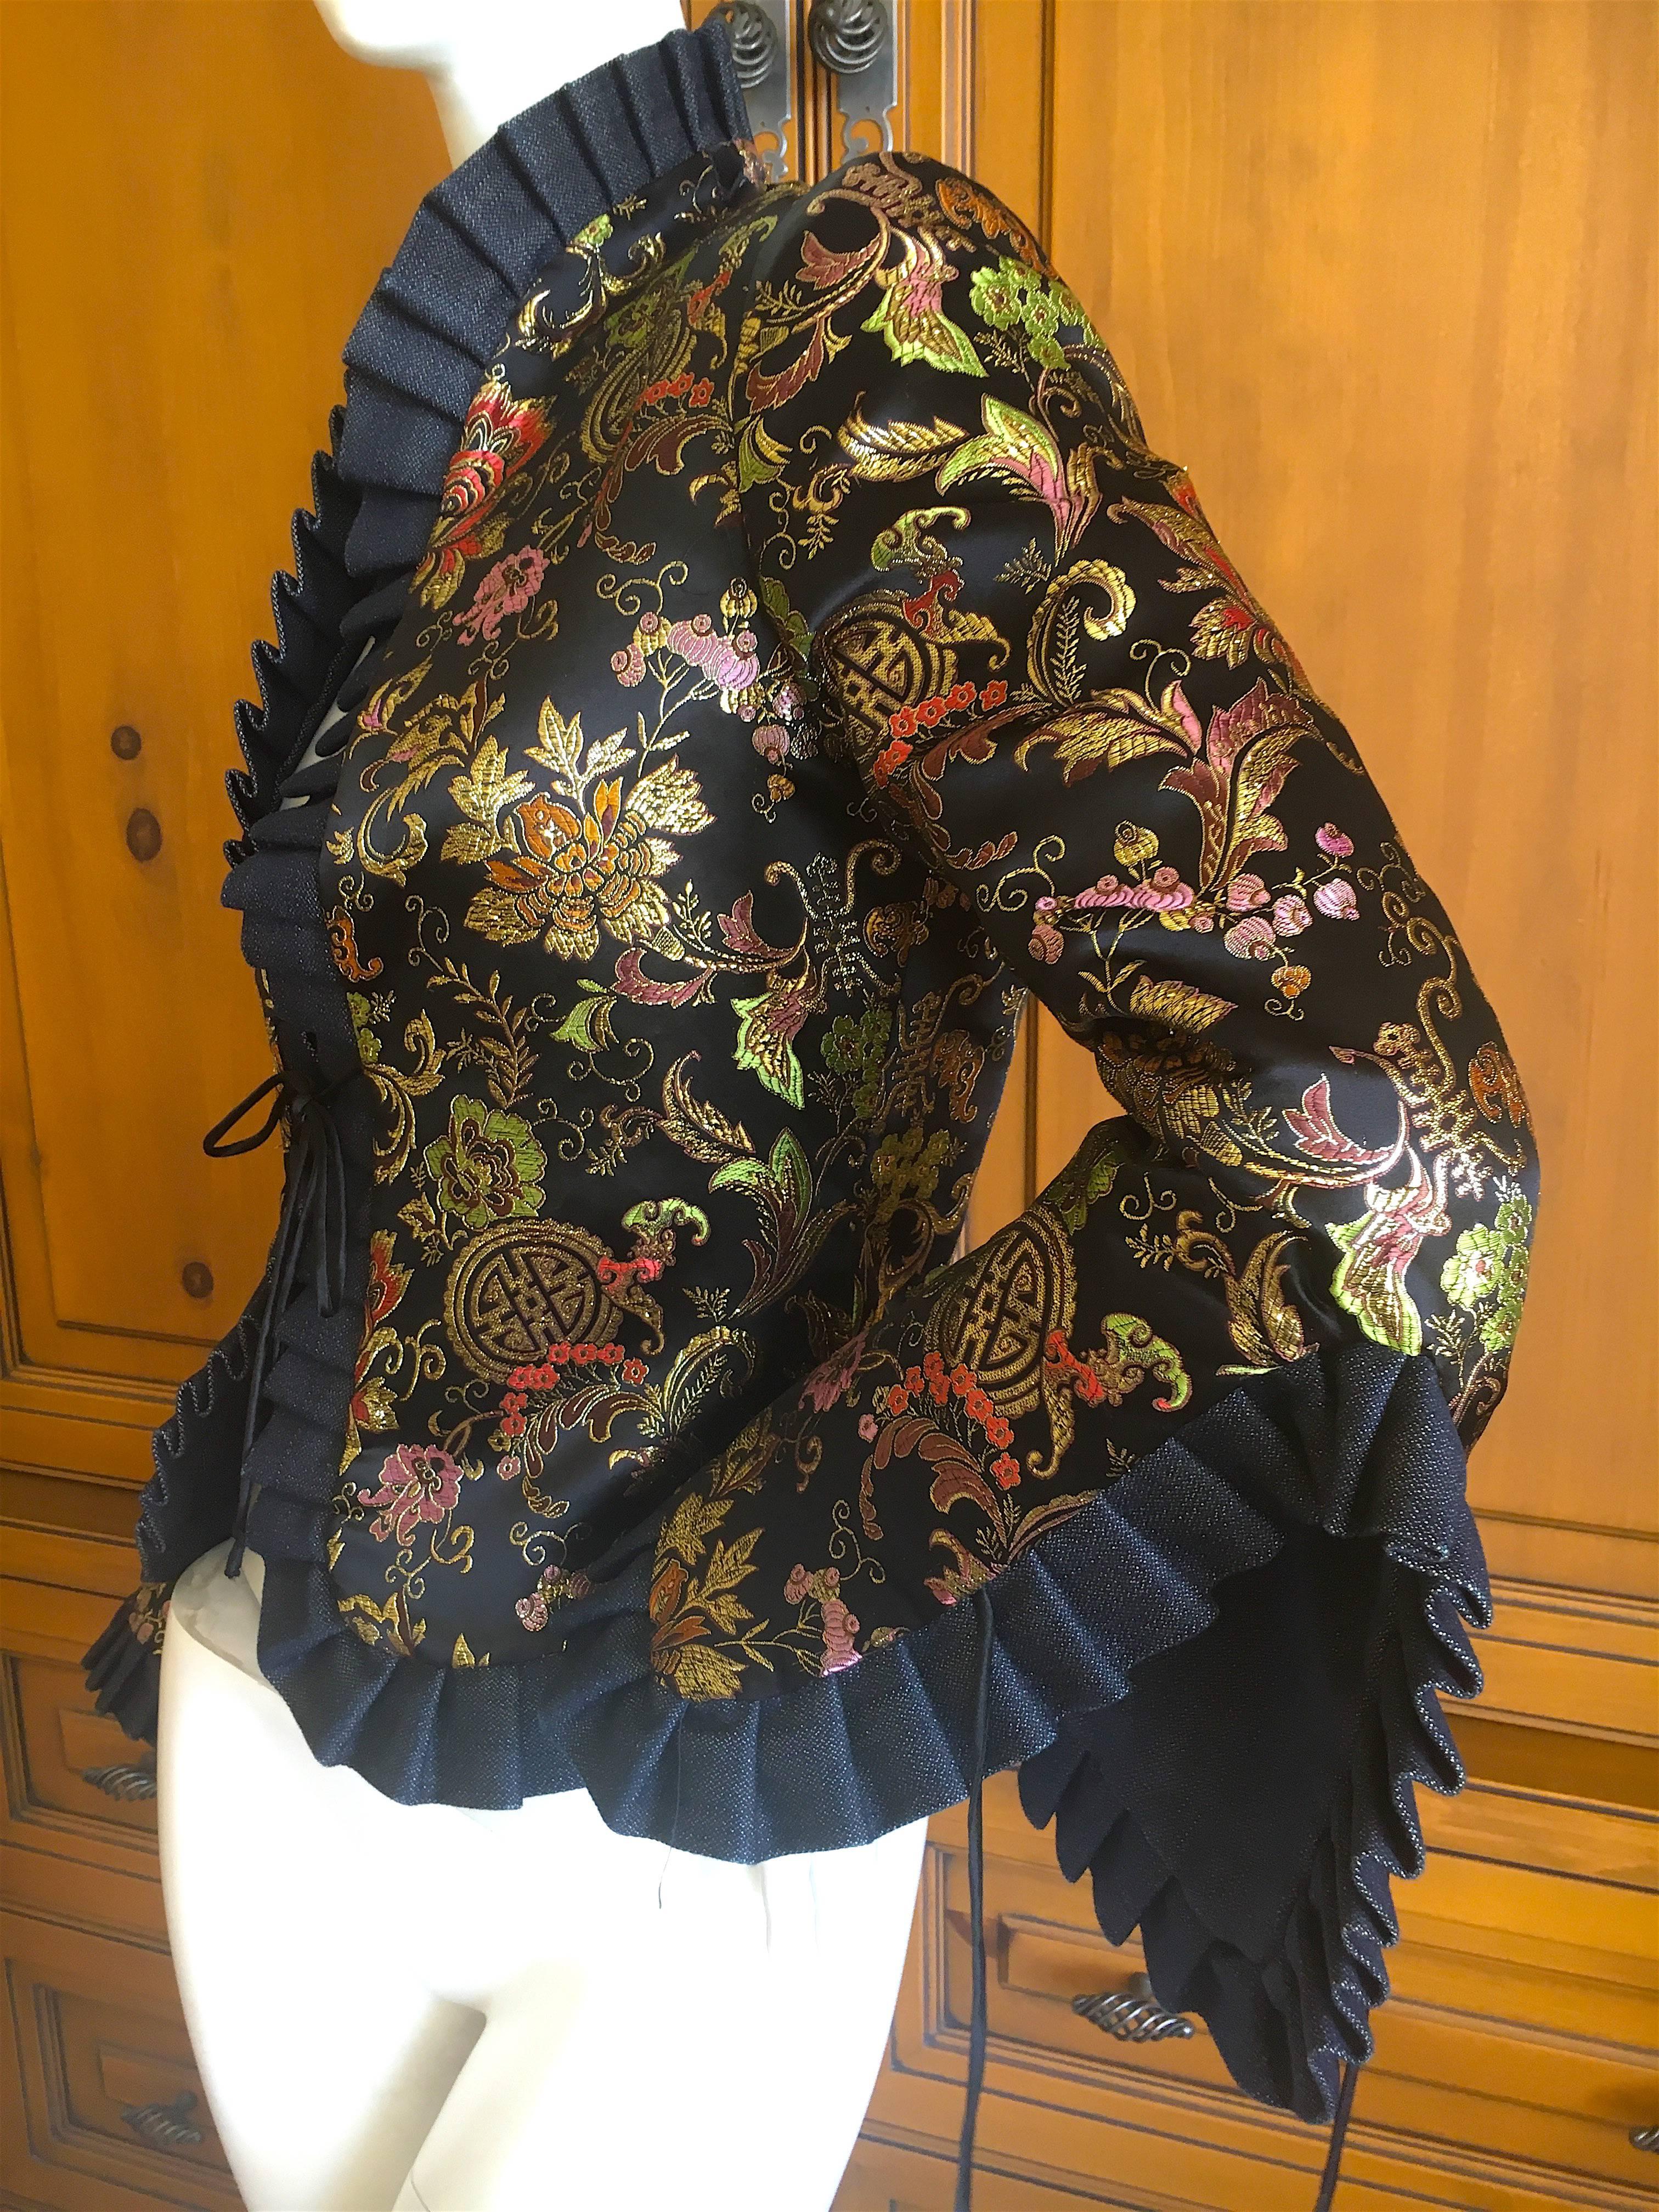 Jean Paul Gaultier Femme Golden Chinoiserie Brocade Reversible Ruffle Jacket.
This is a wonderful piece, with flamenco ruffles at the cuff and collar.
Reversible to denim. This has the Gaultier tags on the brocade side, but will need to be removed